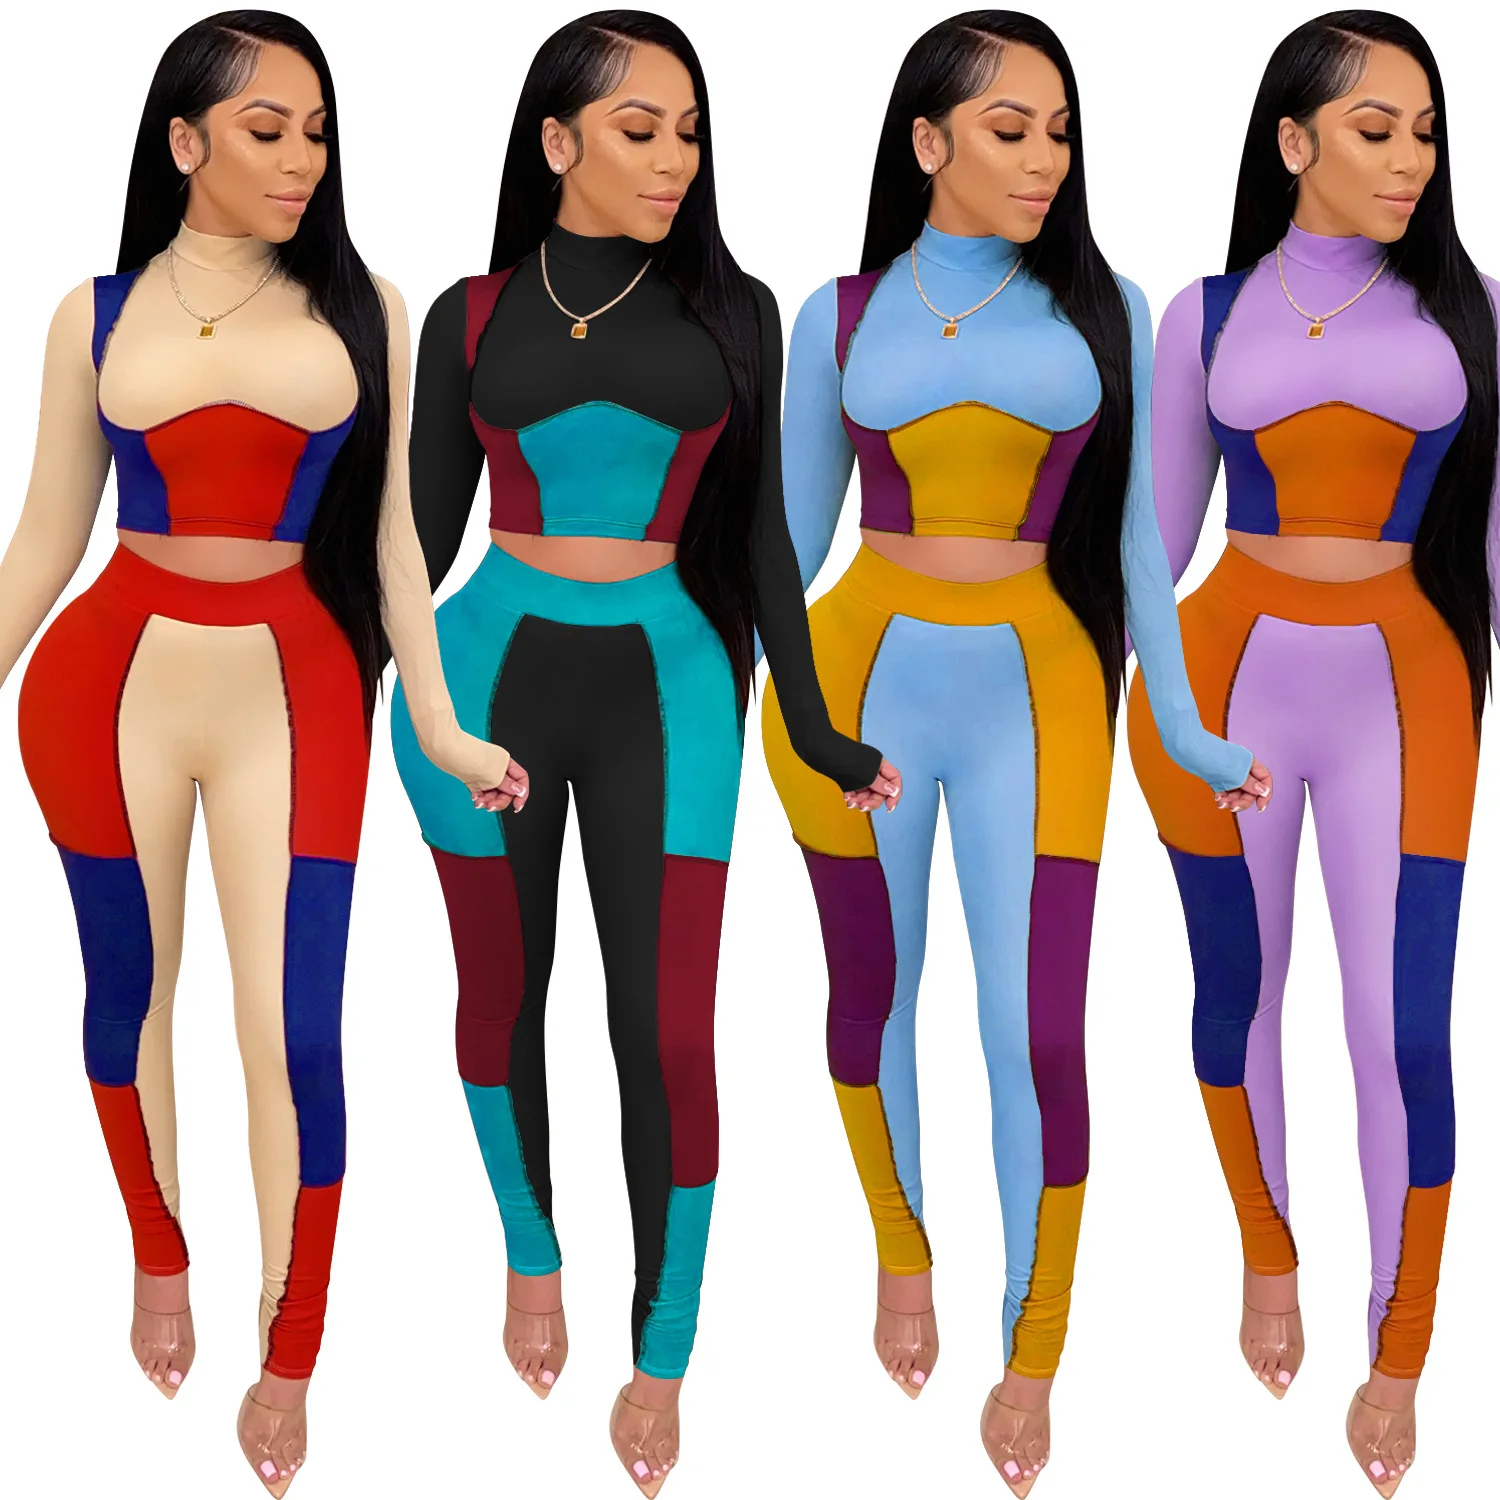 

OR-C5013 New arrival women jogger sweatsuit sets skinny long sleeve and pants sexy two piece set fall 2021 women clothes casual, As show